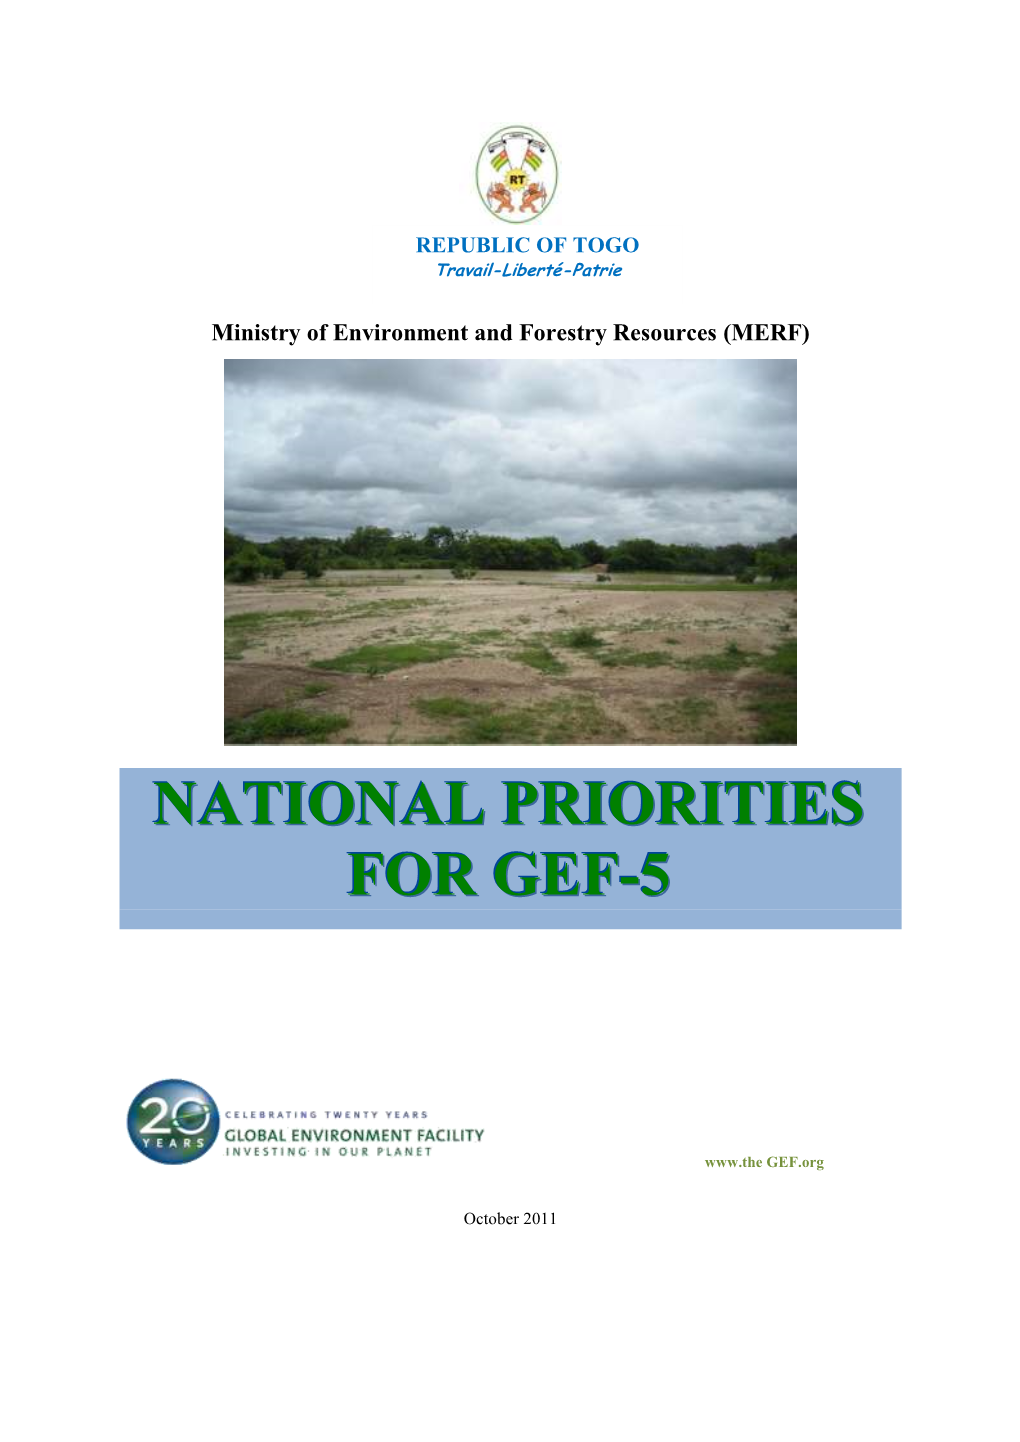 National Priorities for GEF-5 (2010–2014) Was Held on September 29, 2011 in the Les Palmiers Hotel Conference Room in Lomé